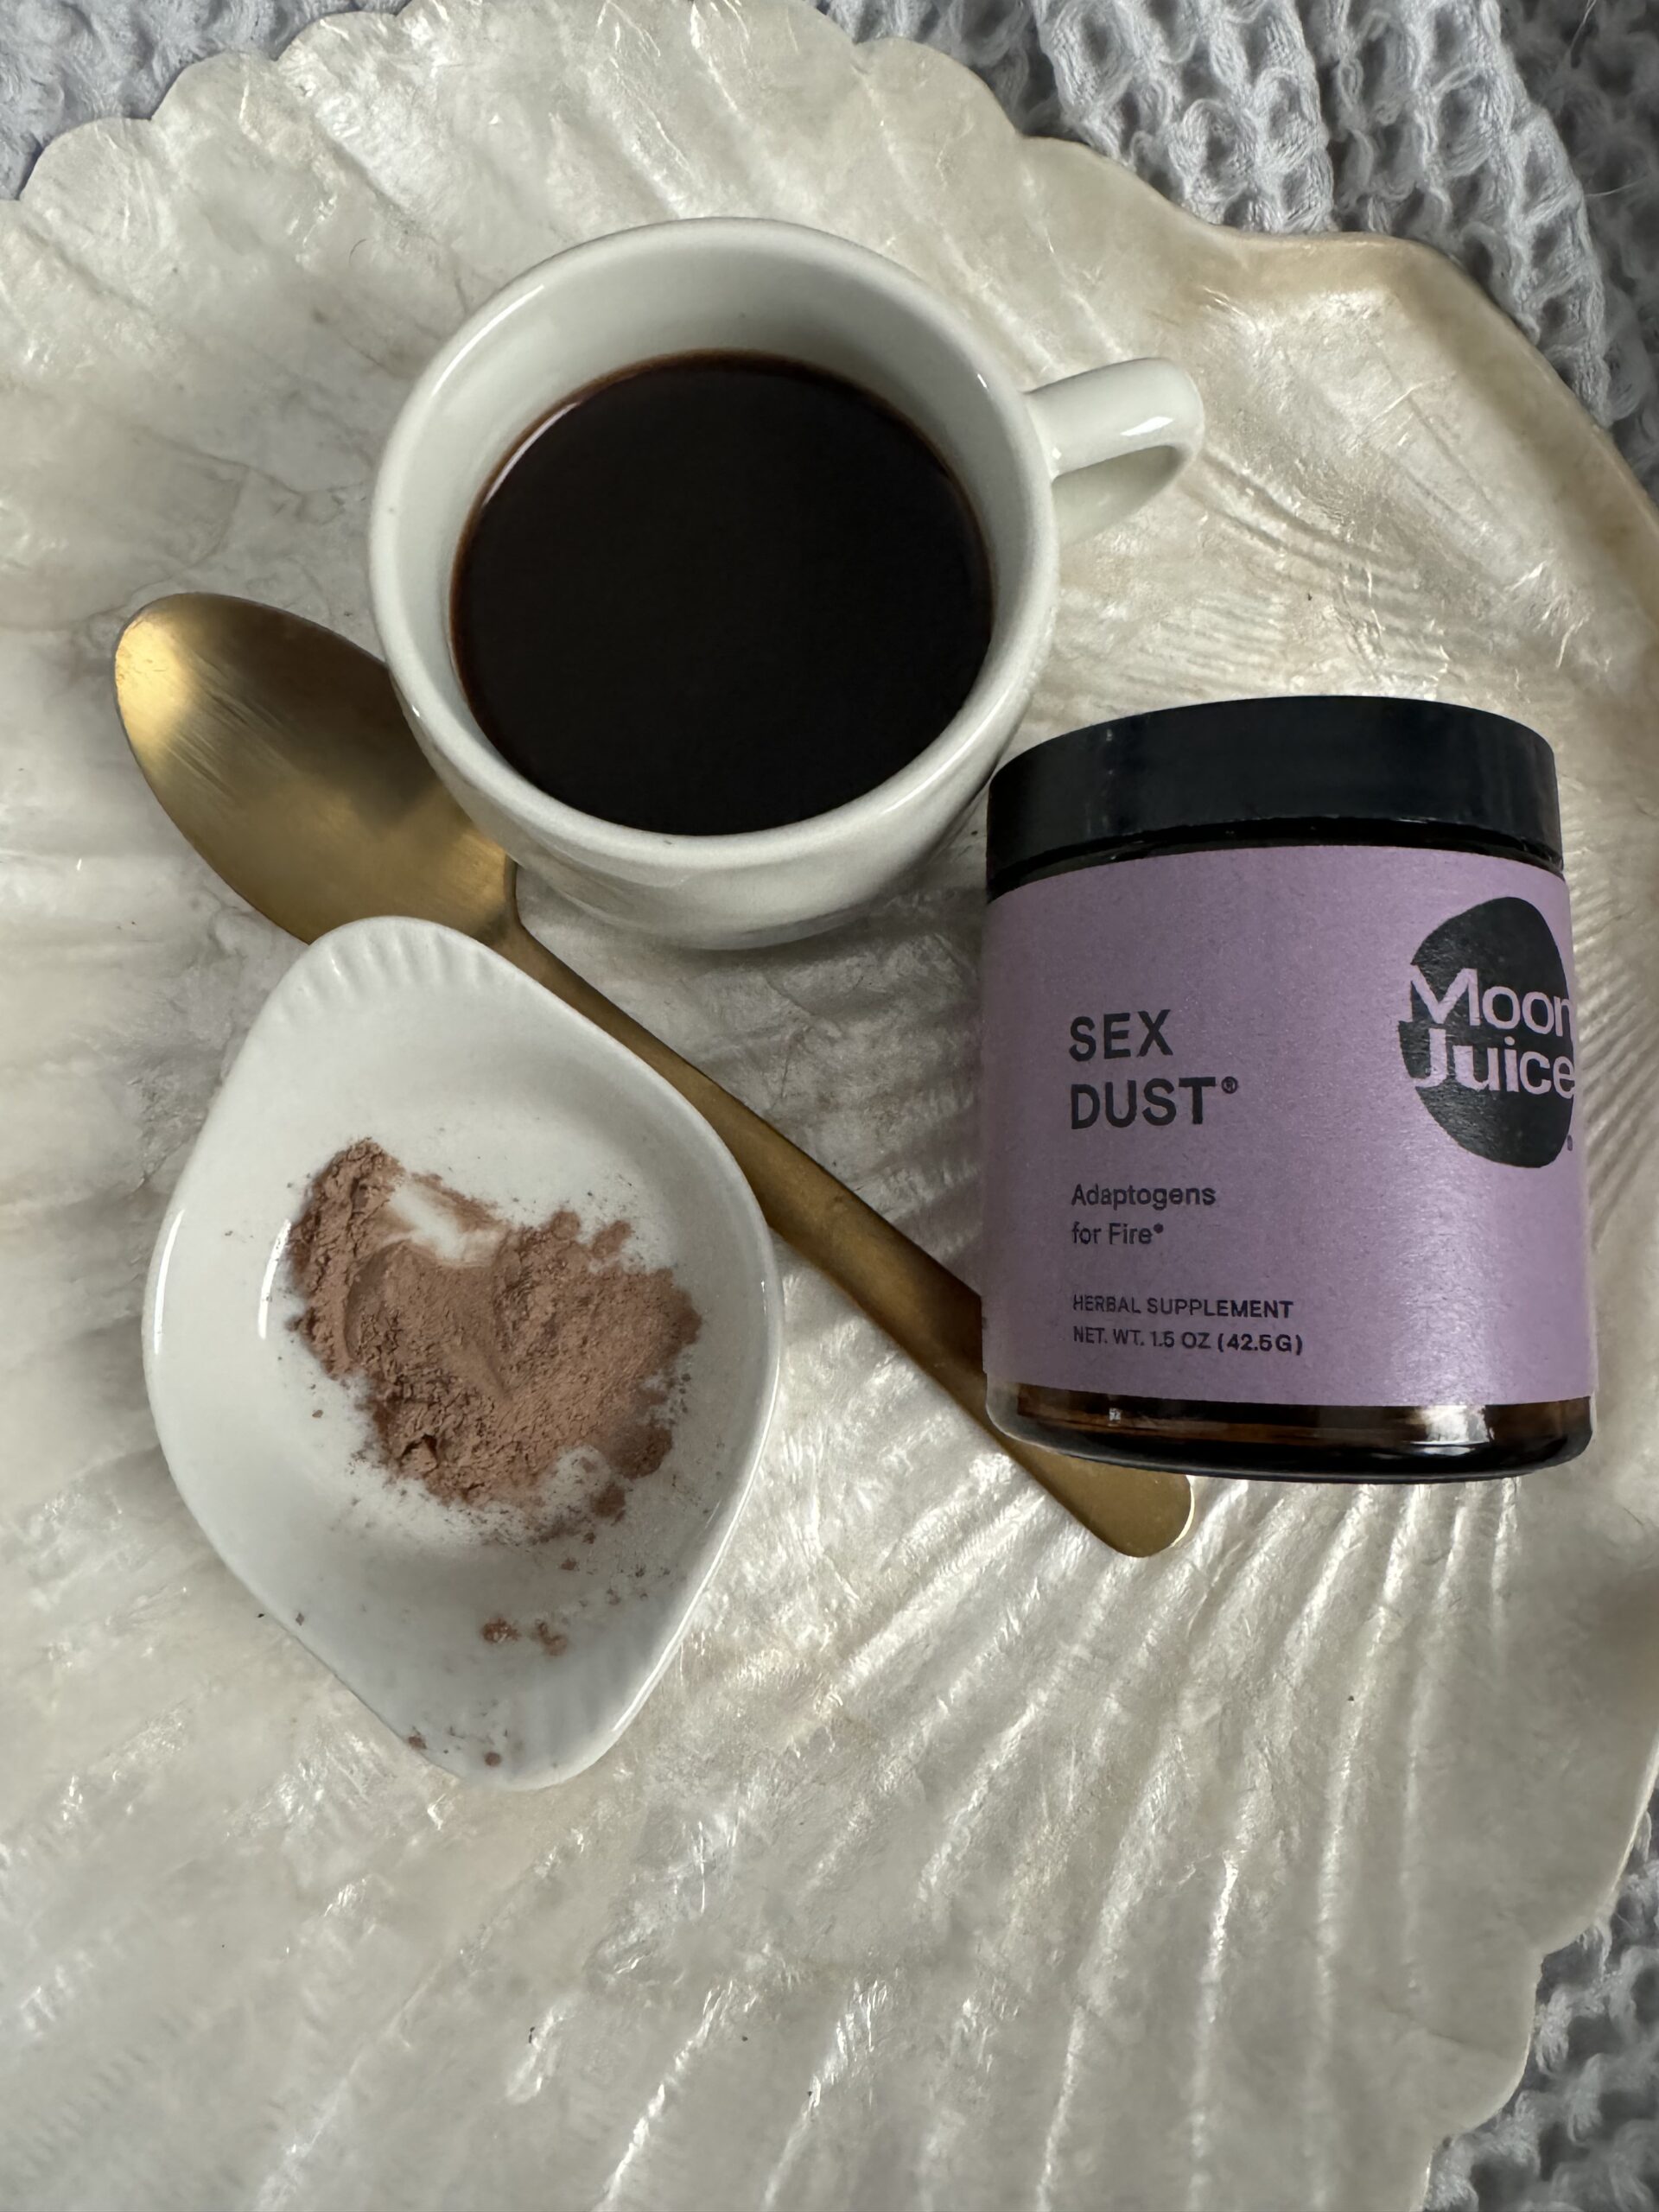 A cup of coffee with a gold spoon, next to a jar labeled "sex dust" by moon juice, and a small dish with powder on a textured white background.